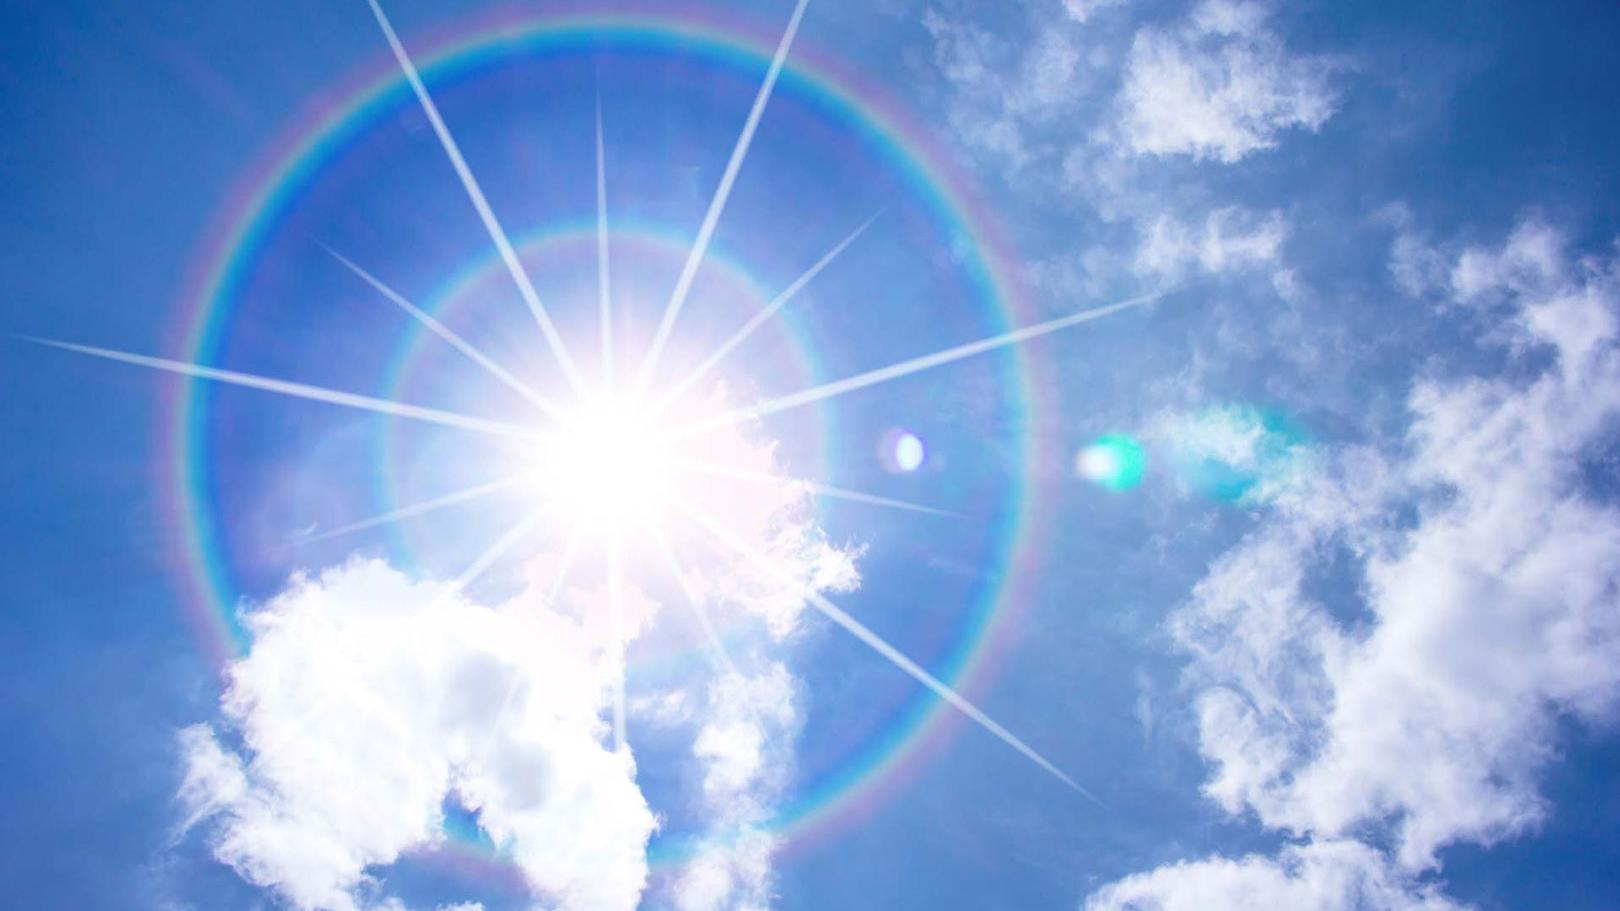 What You Should Know about UV Rays and Healthy Eyes